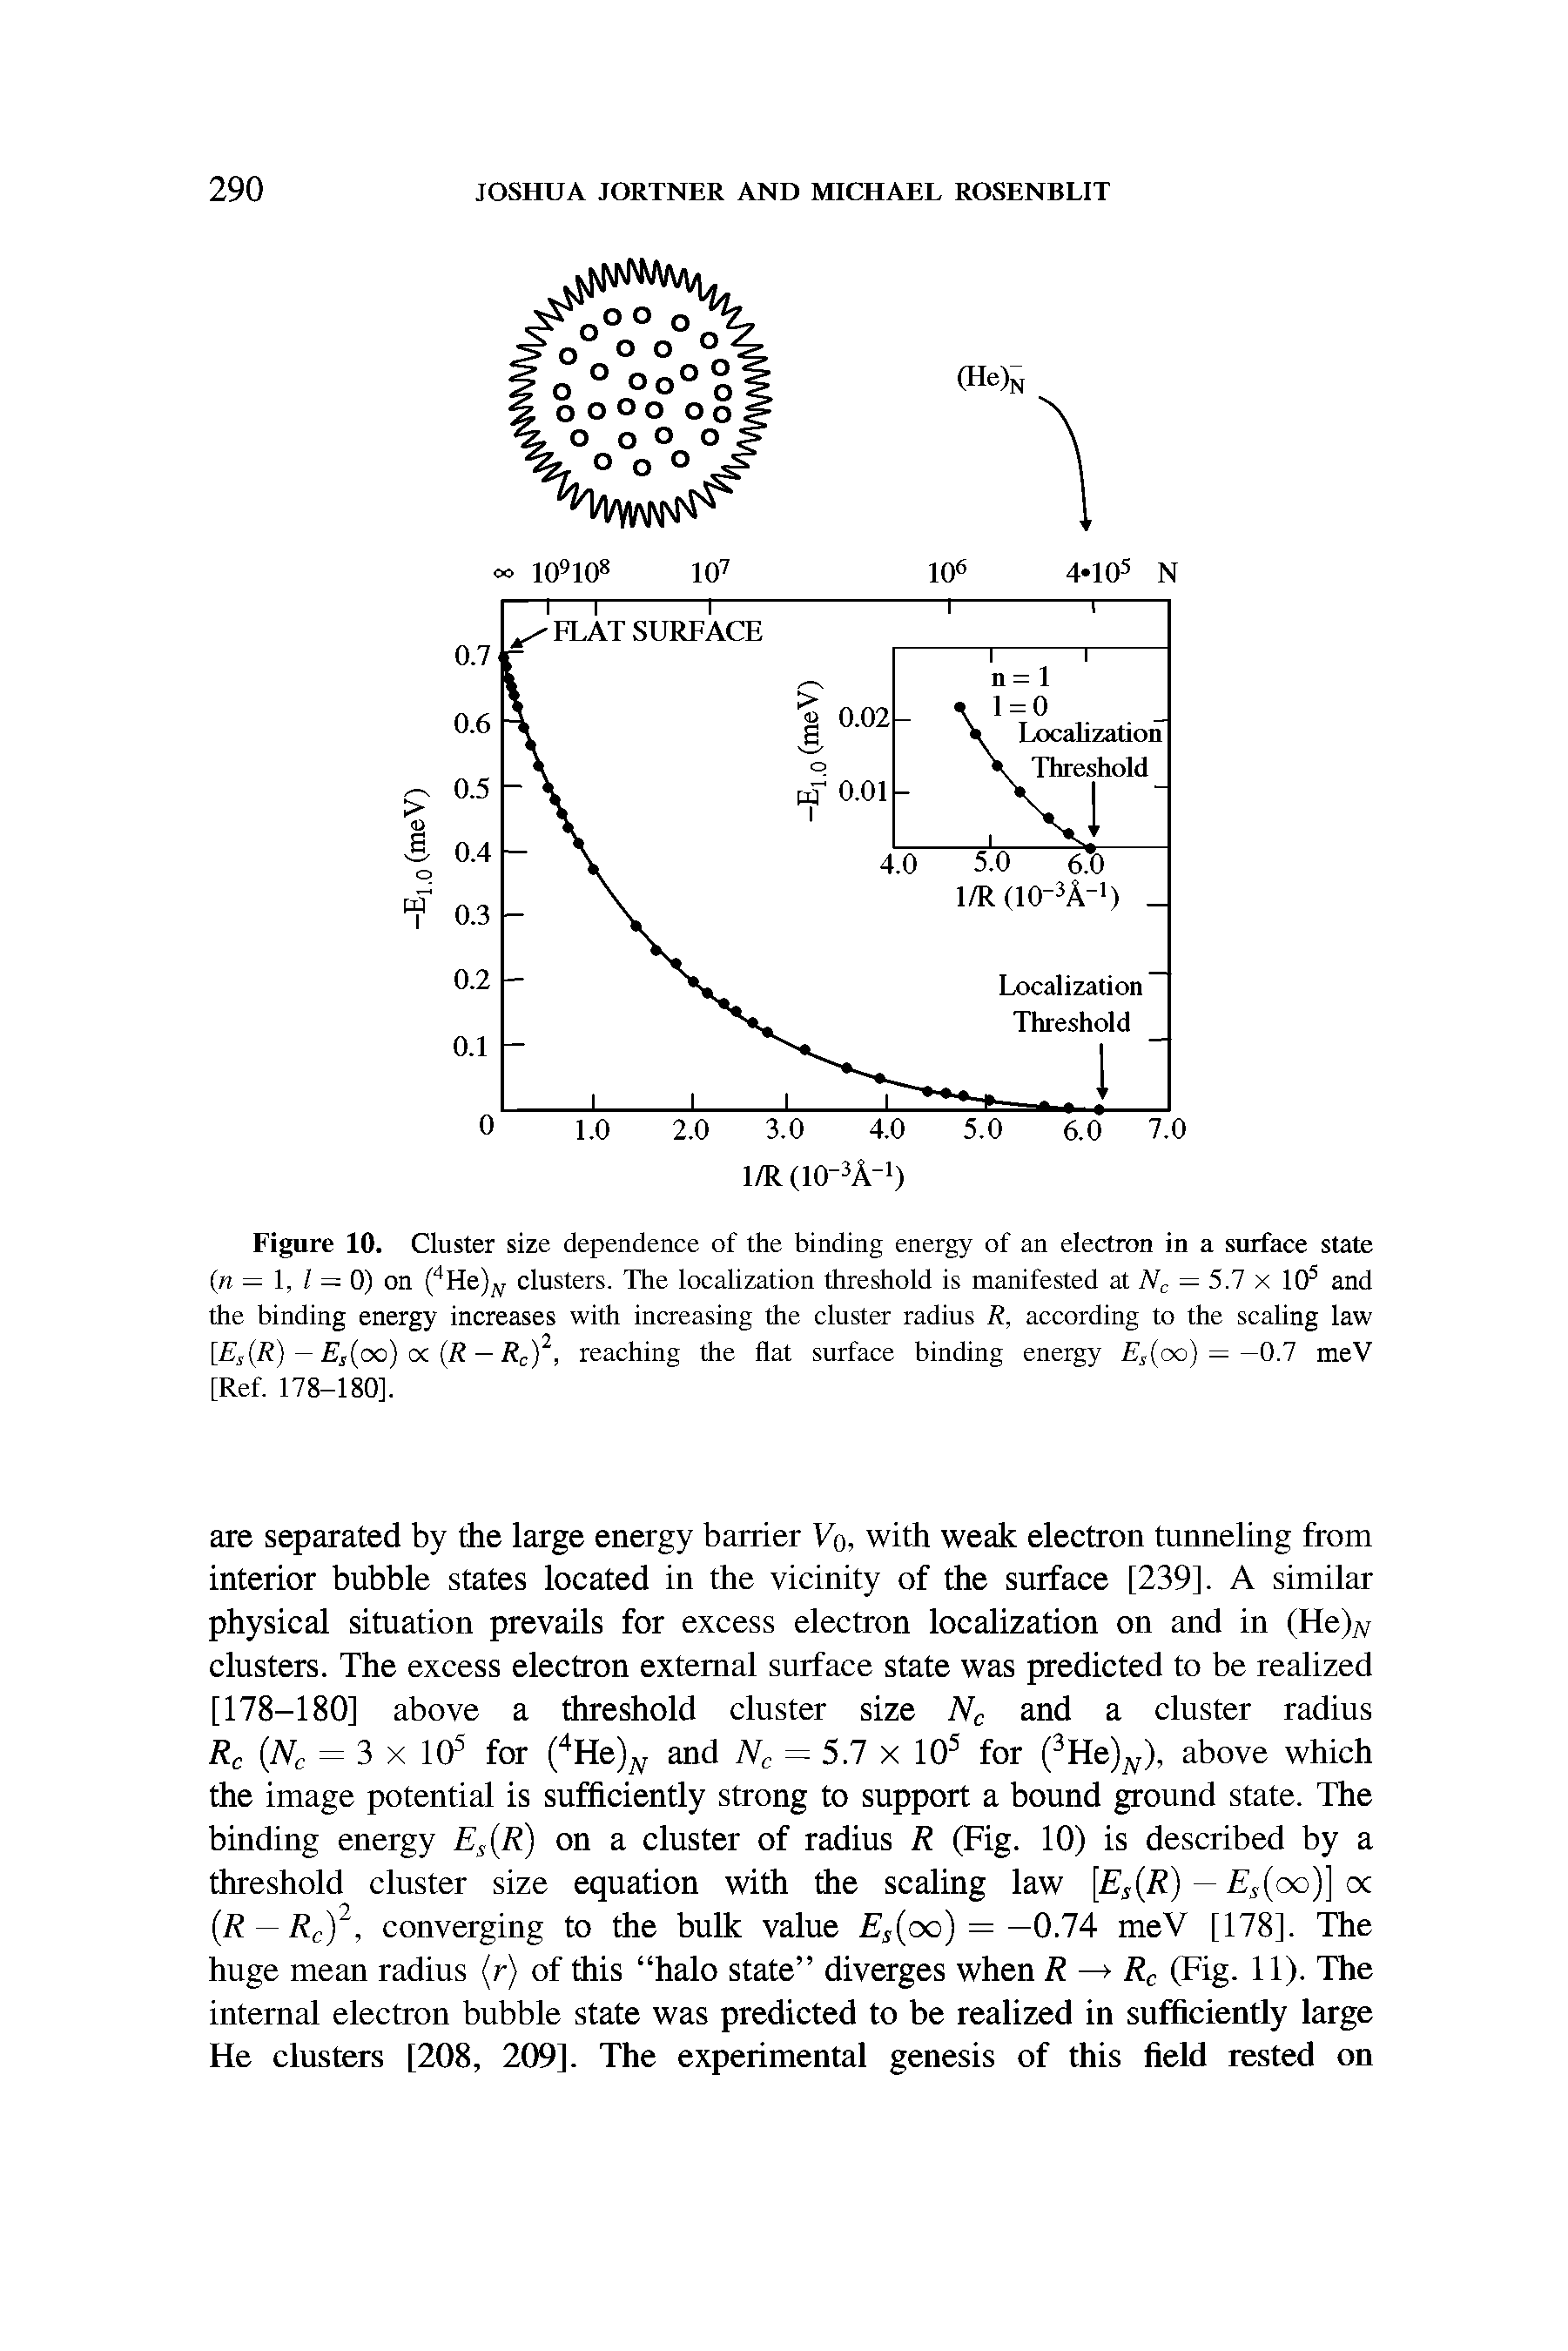 Figure 10. Cluster size dependence of the binding energy of an electron in a surface state (n = 1, / = 0) on ( He)jy clusters. The localization threshold is manifested at = 5.7 x 10 and the binding energy increases with increasing the cluster radius R, according to the scaling law [ j(R) — j(oo) (X (R — reaching the flat surface binding energy Es(oo) =—OJ meV...